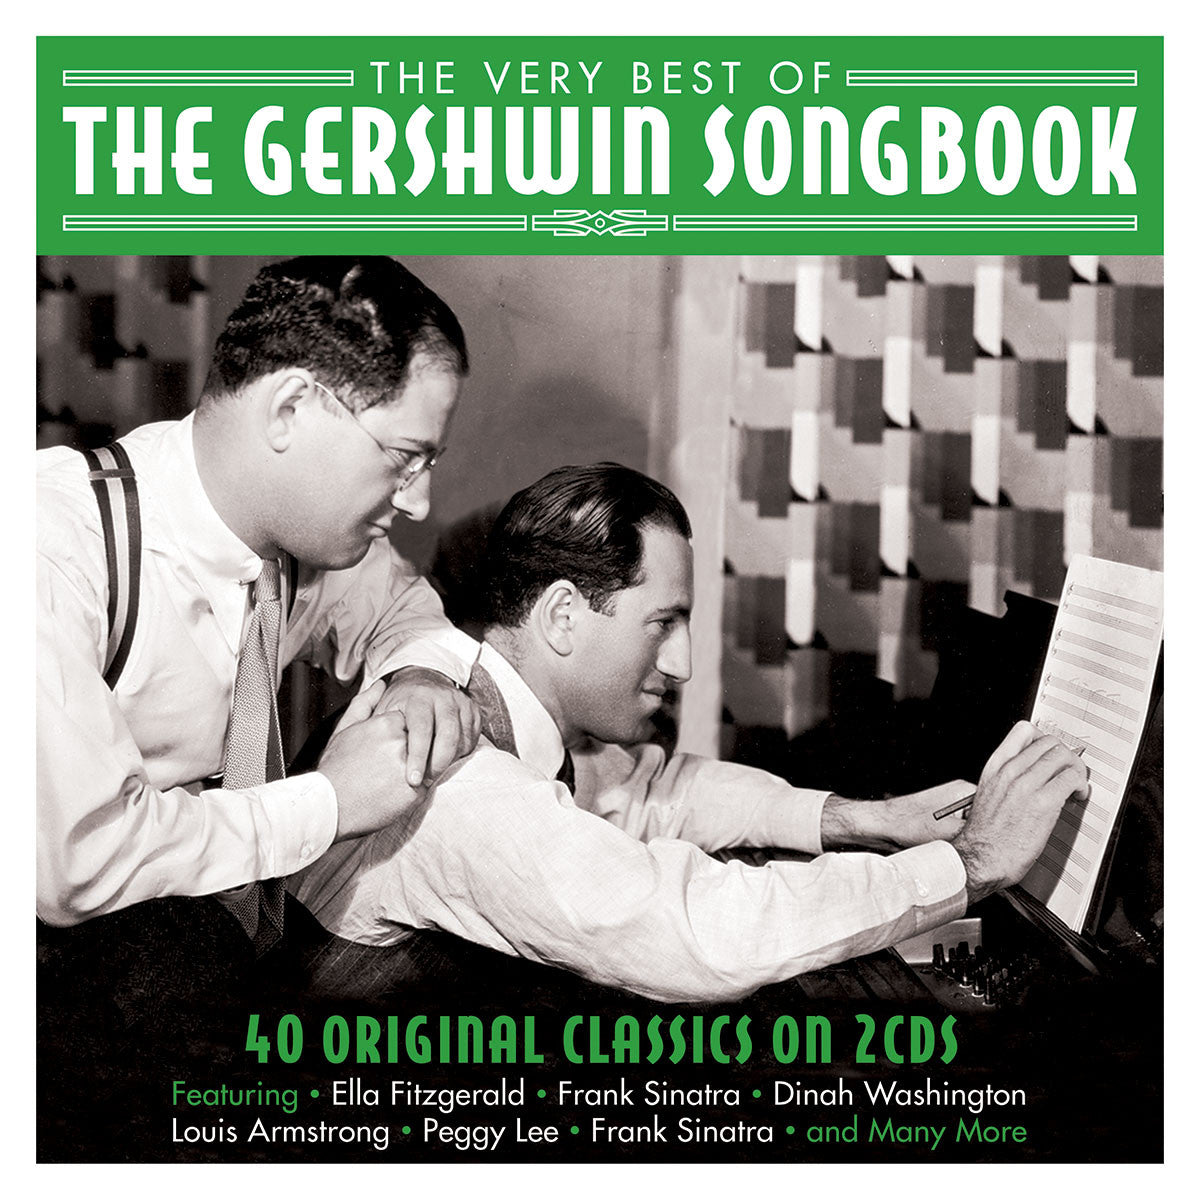 GEORGE AND IRA GERSHWIN: THE VERY BEST OF THE GERSHWIN SONGBOOK (2 CDS)